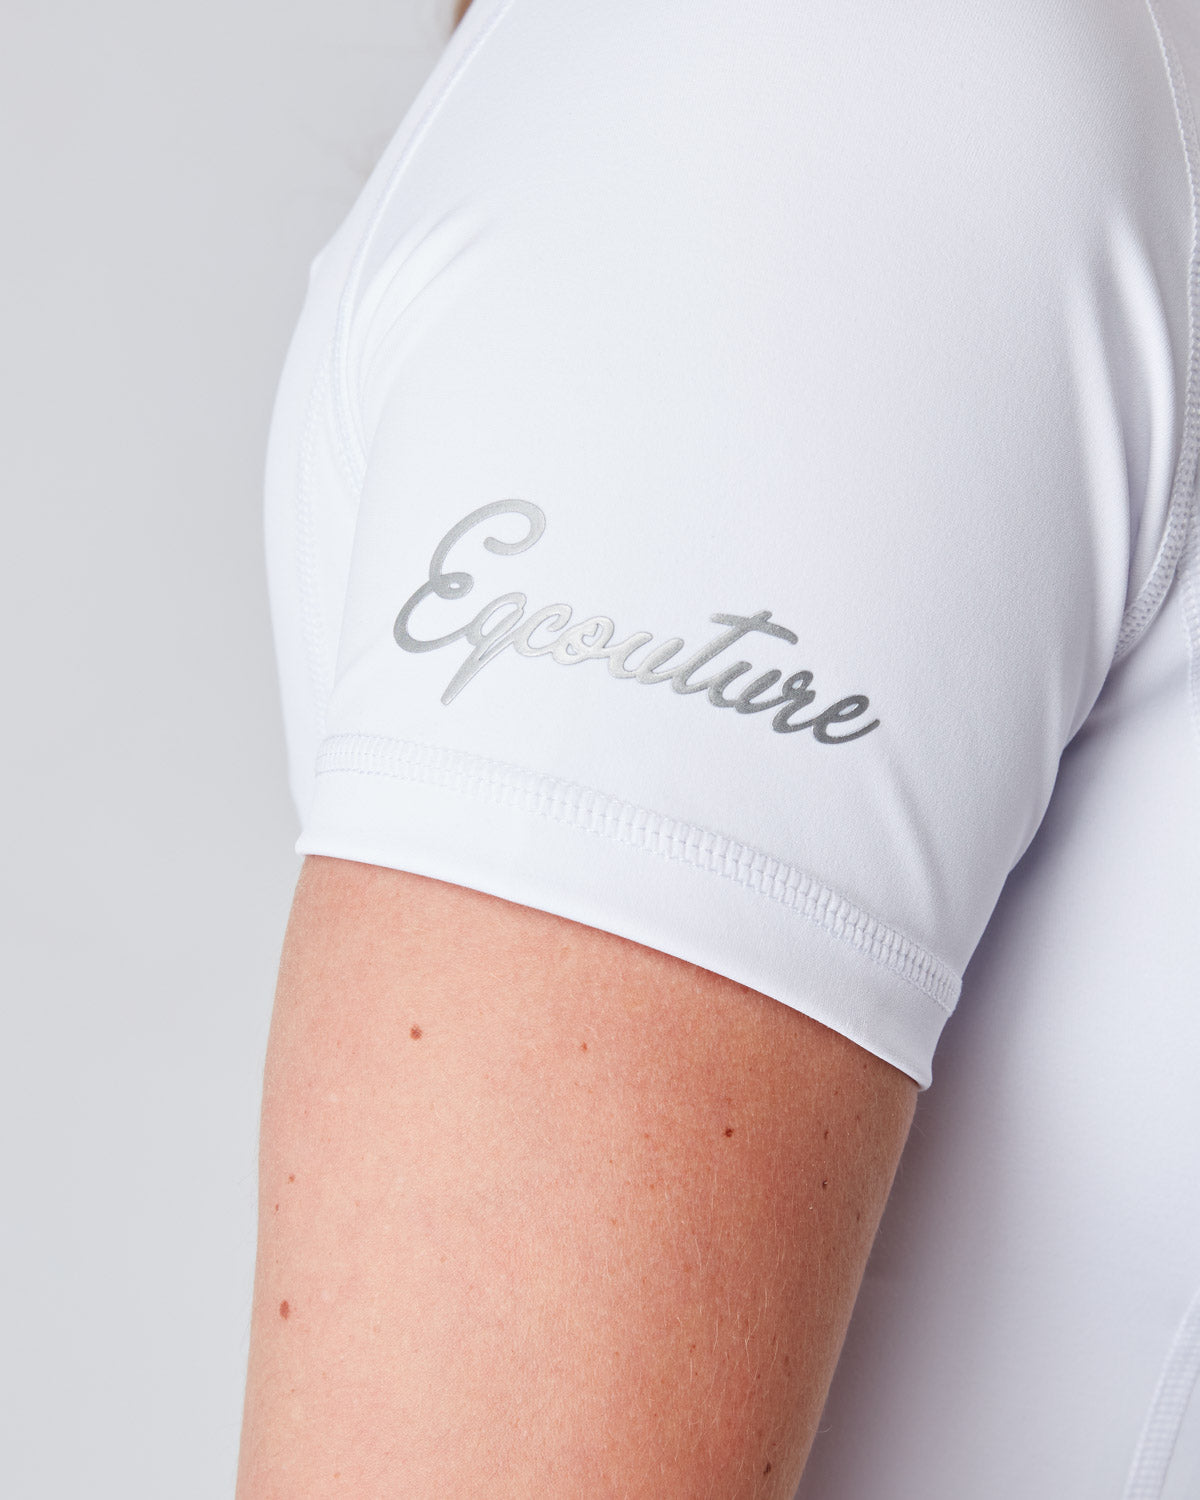 Equestrian Base Layer Short Sleeved - Pure White